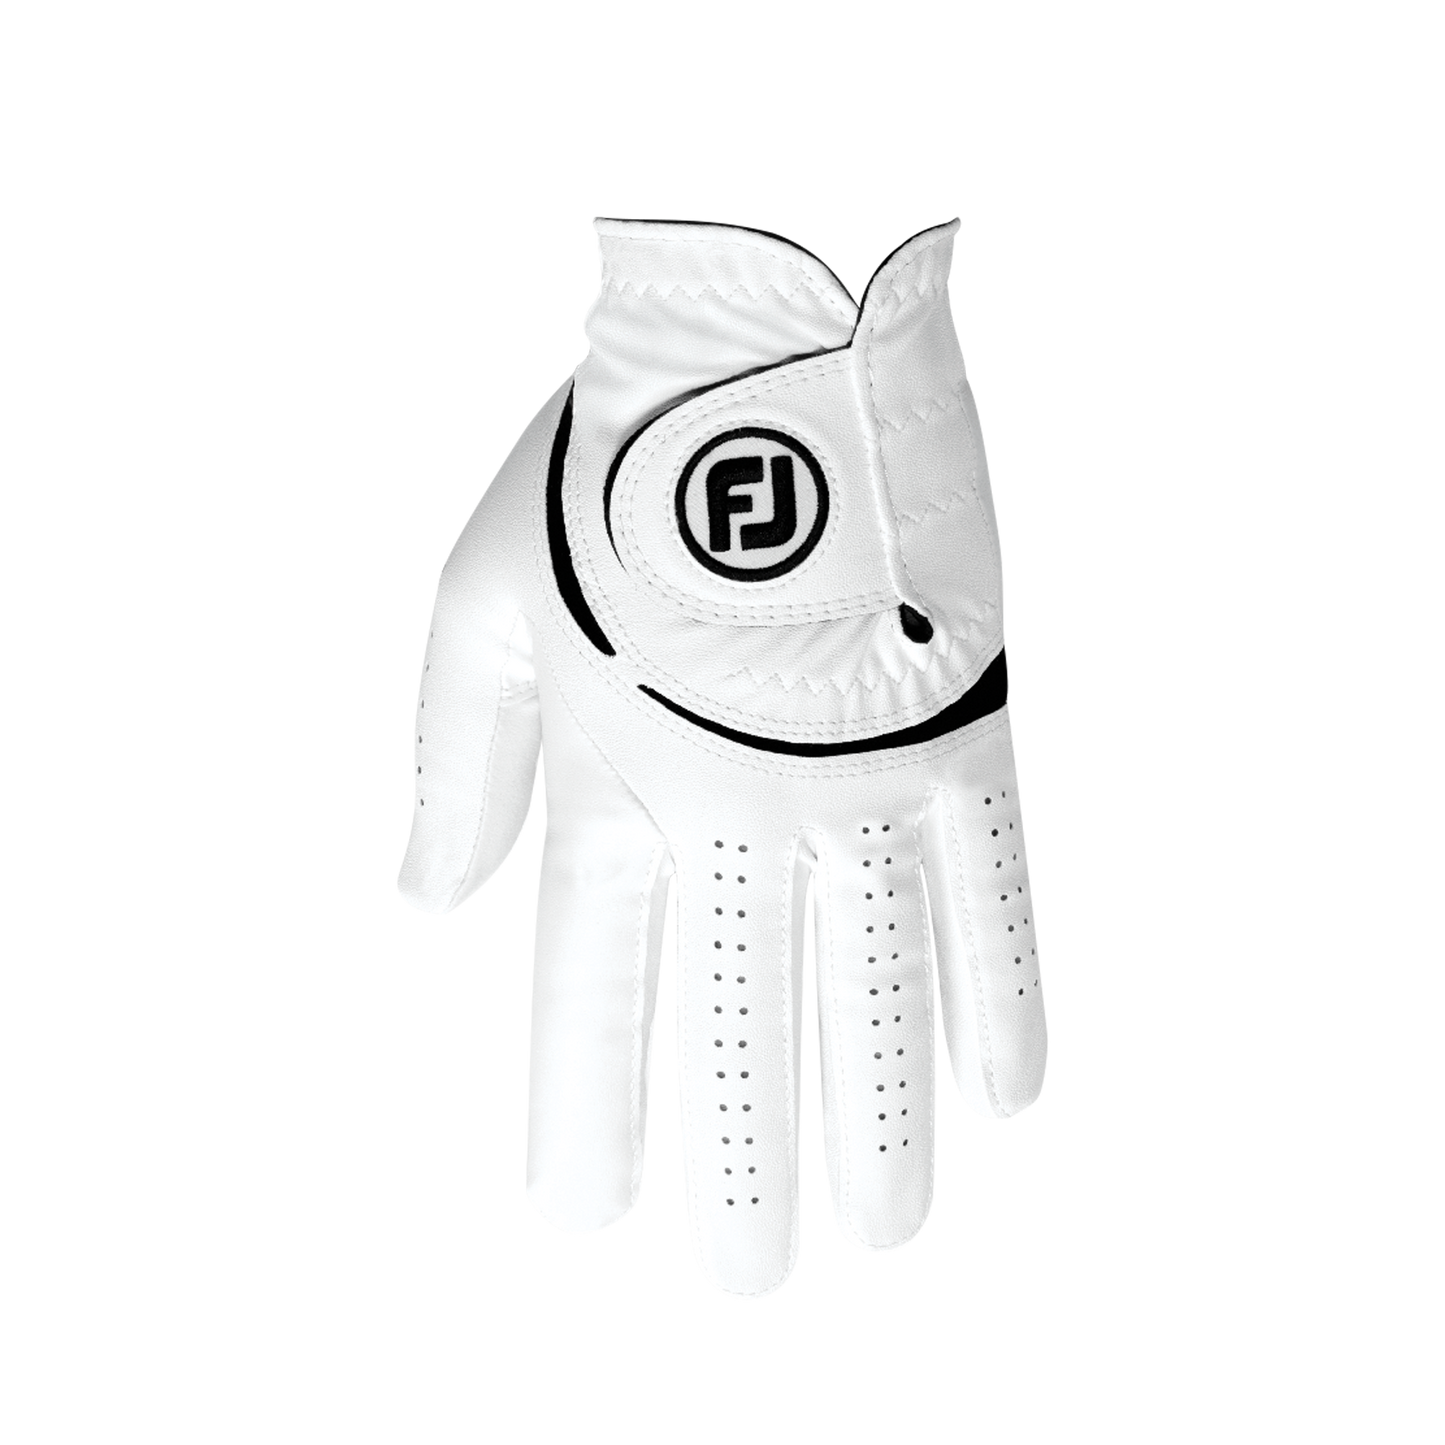 FootJoy WeatherSof Golf Glove 66161 - Right Hand White / Black S Right Hand (Left Handed Golfer)